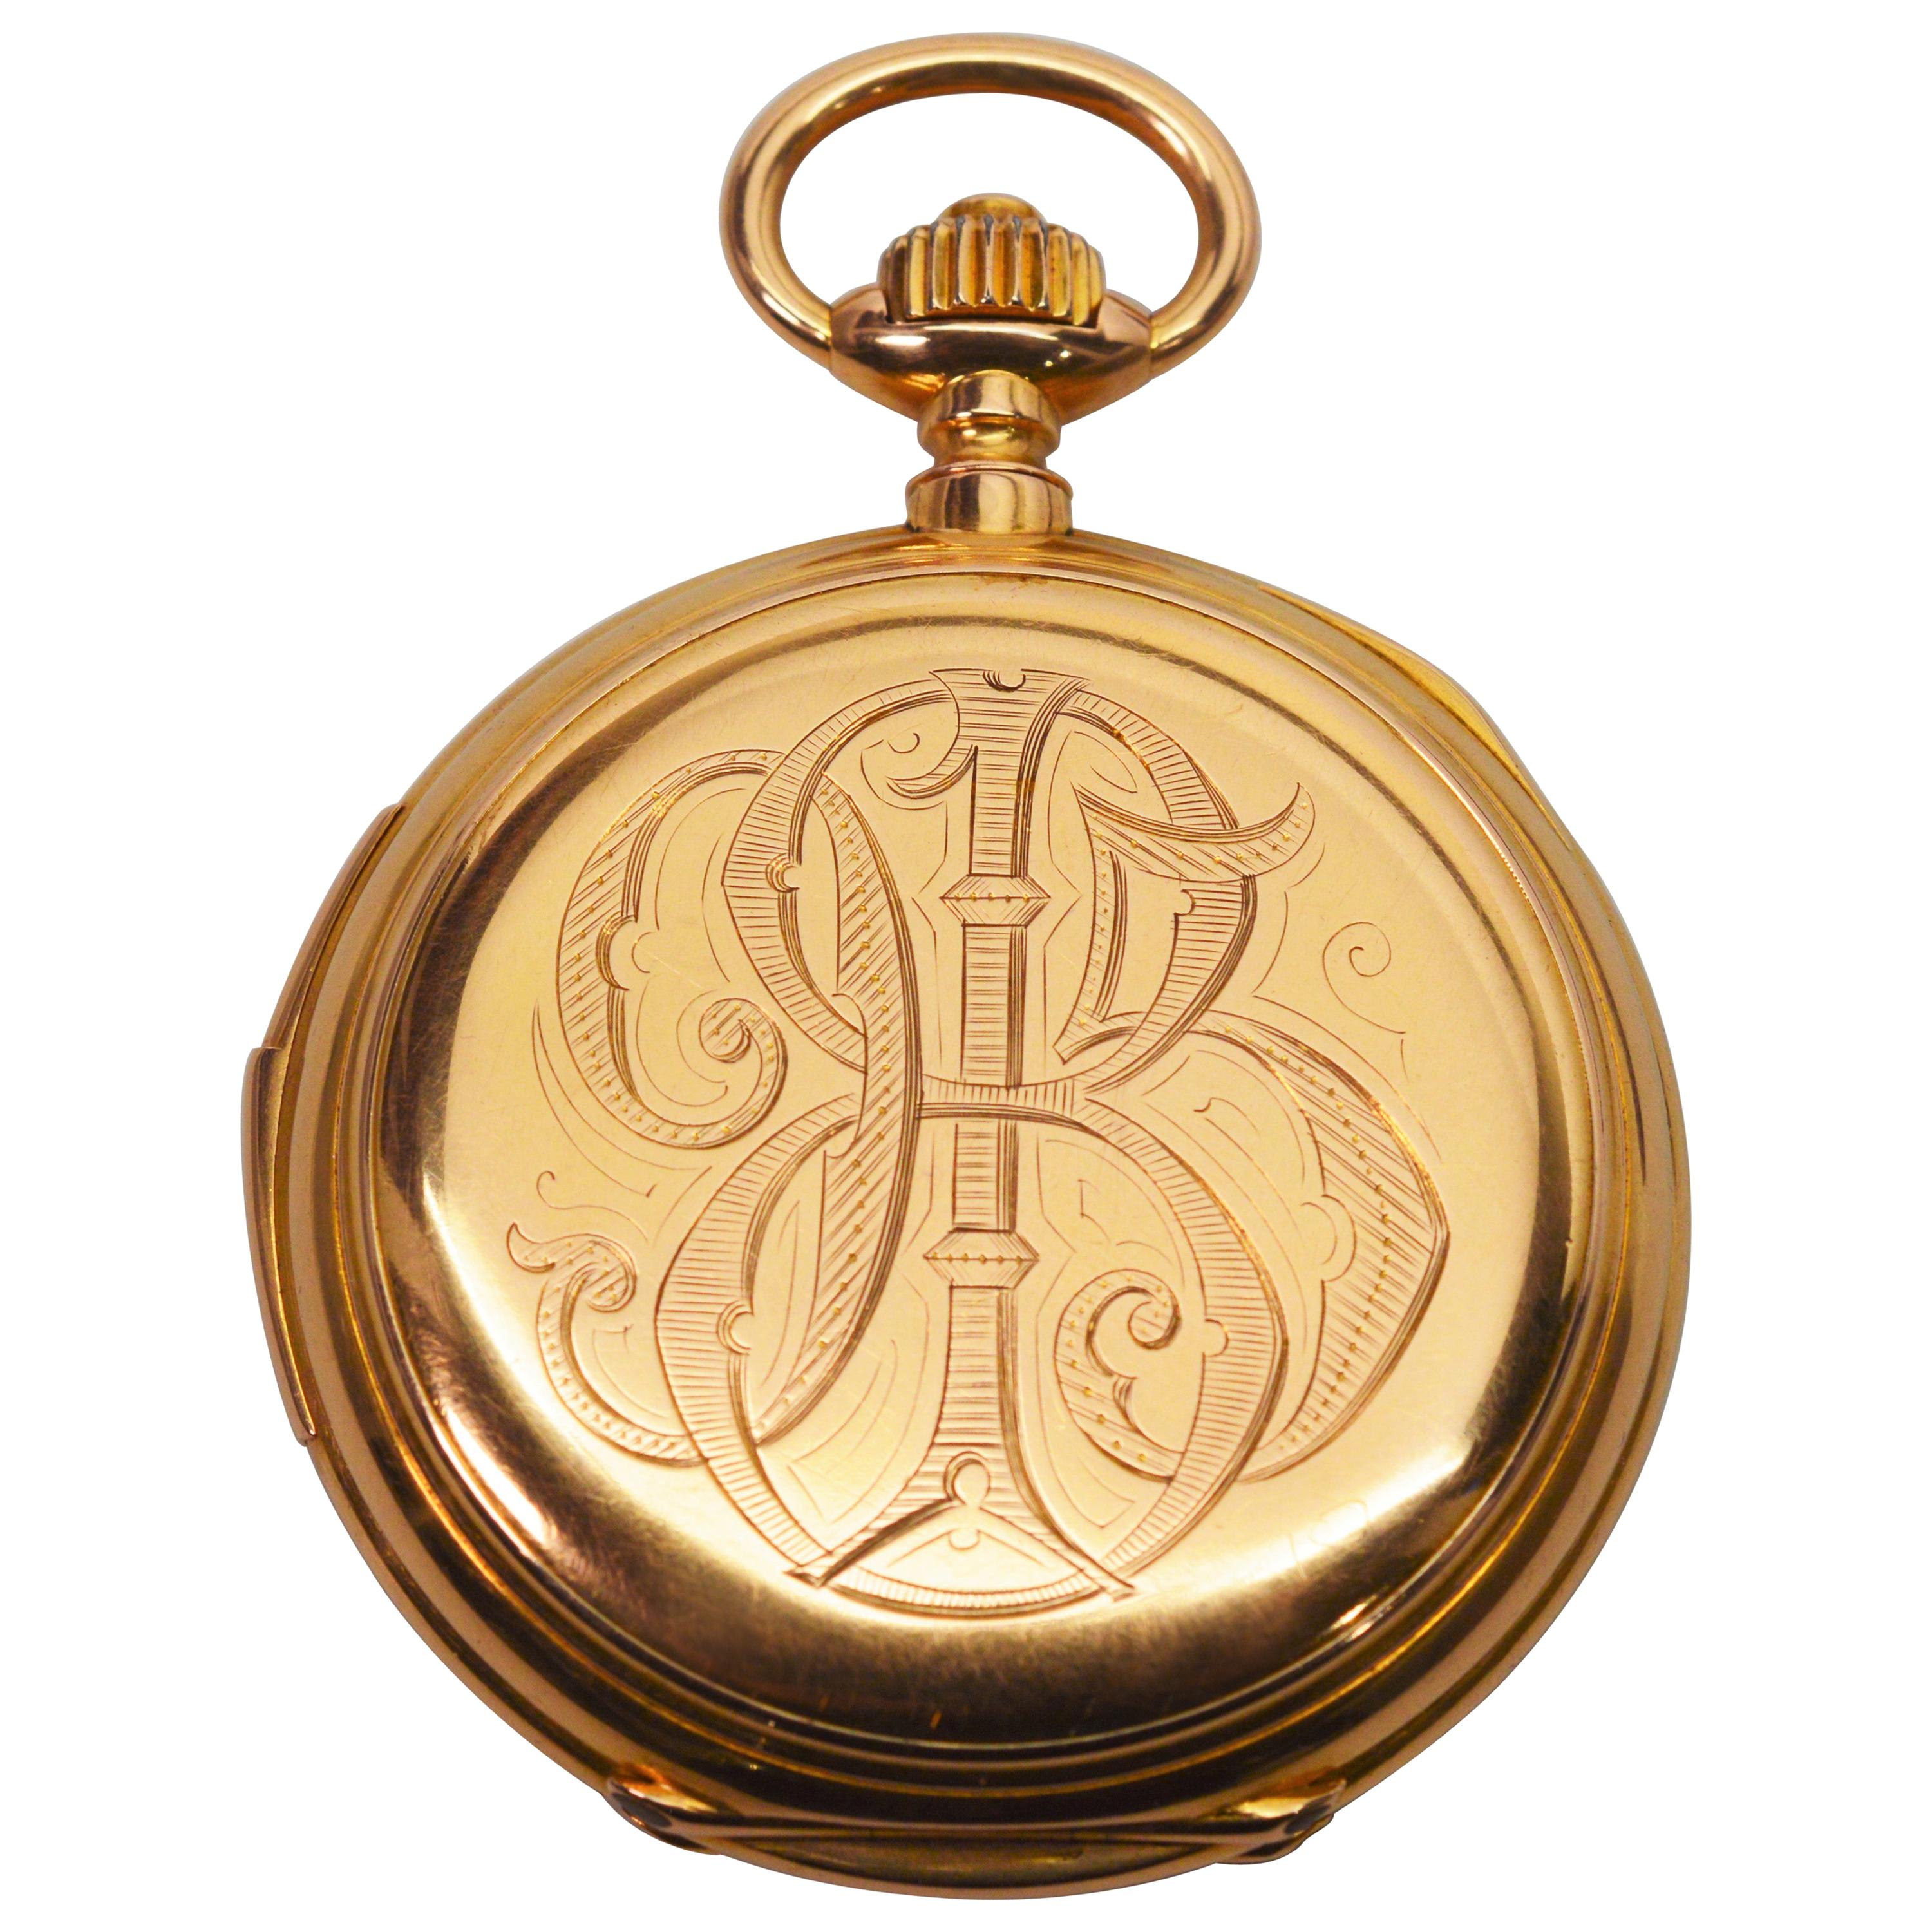 LeCoultre & Co. 18 Karat Yellow Gold Quarter Hour Repeater Pocket Watch